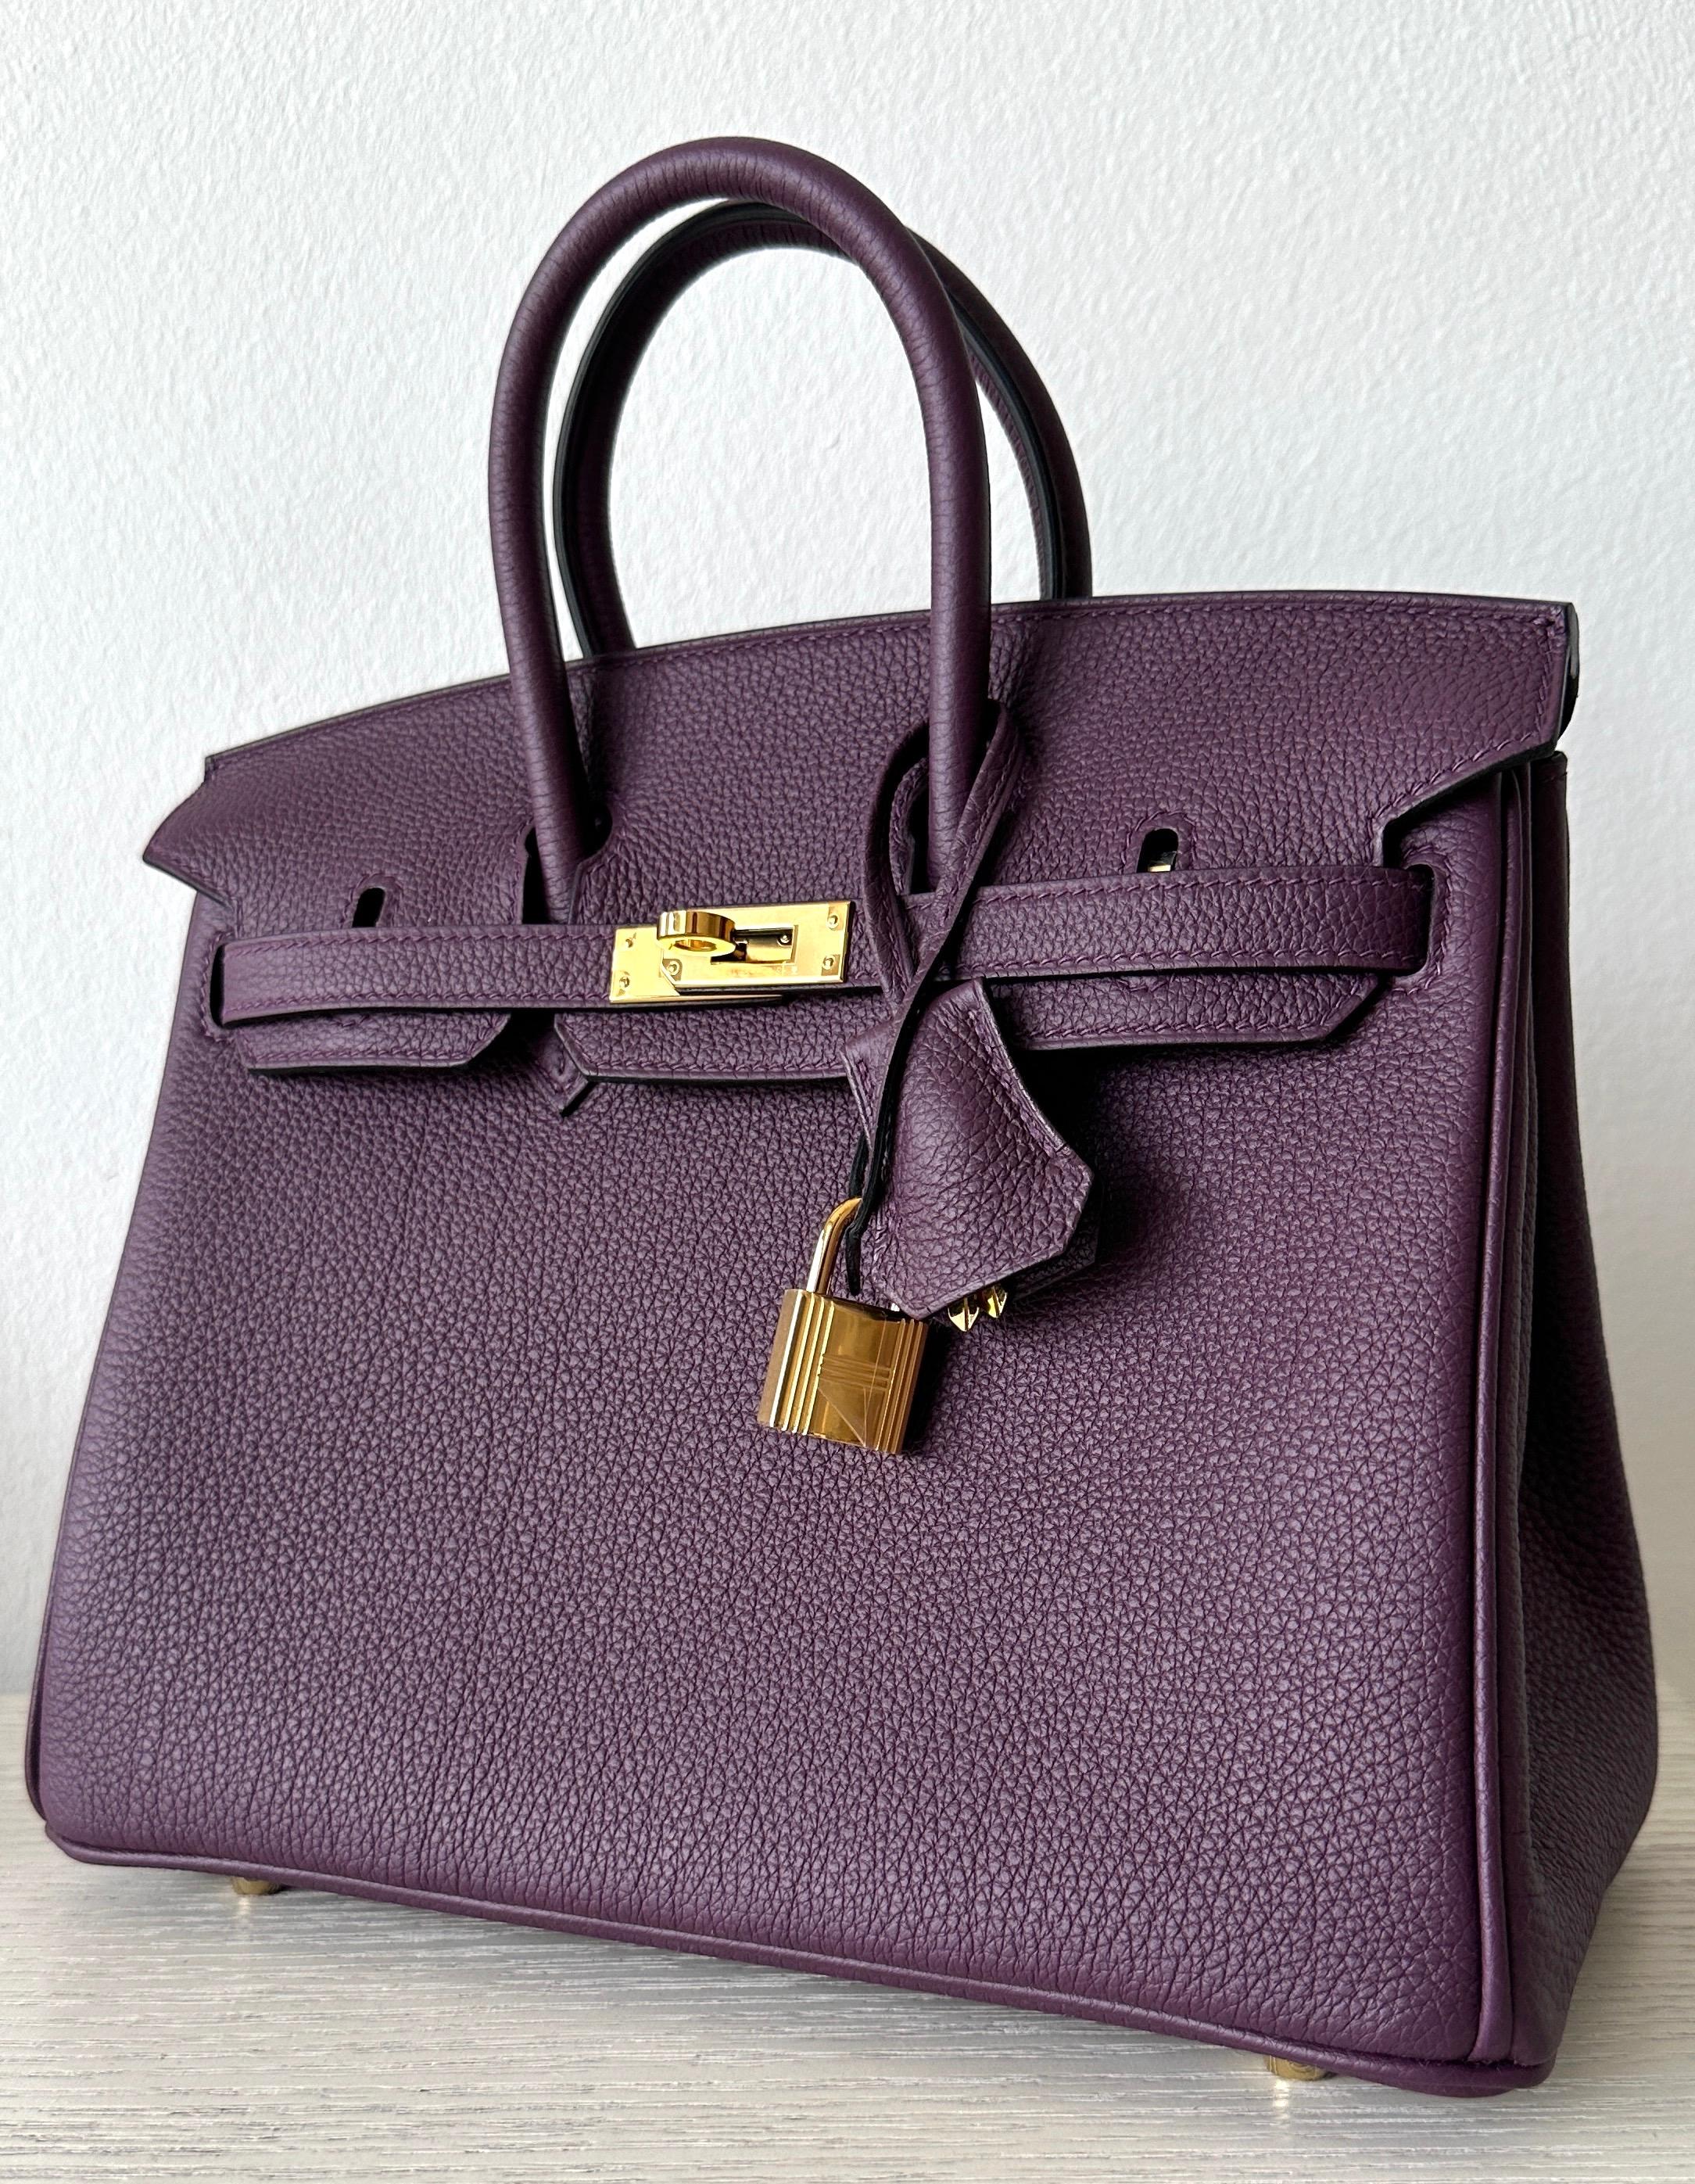 Hermes Birkin 25cm
Cassis, stunning color! 
Gold Hardware
The Hermes Cassis Birkin is a luxury handbag from the fashion house Hermes. It is a variation of the iconic Hermes Birkin bag, which was first introduced in 1984 and has since become one of